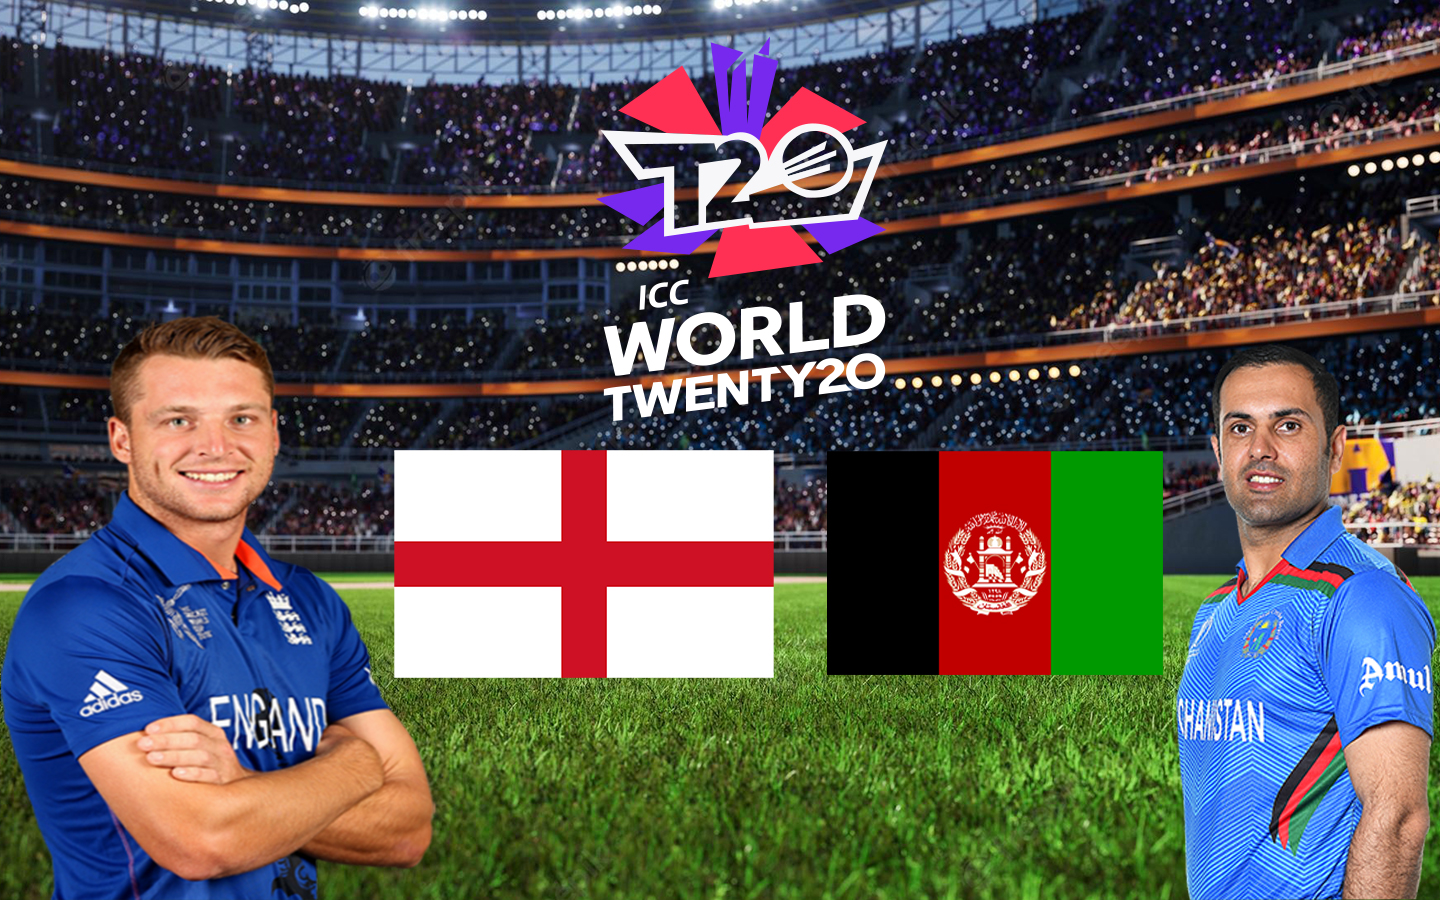 England VS Afghanistan T20 World Cup Live Streaming